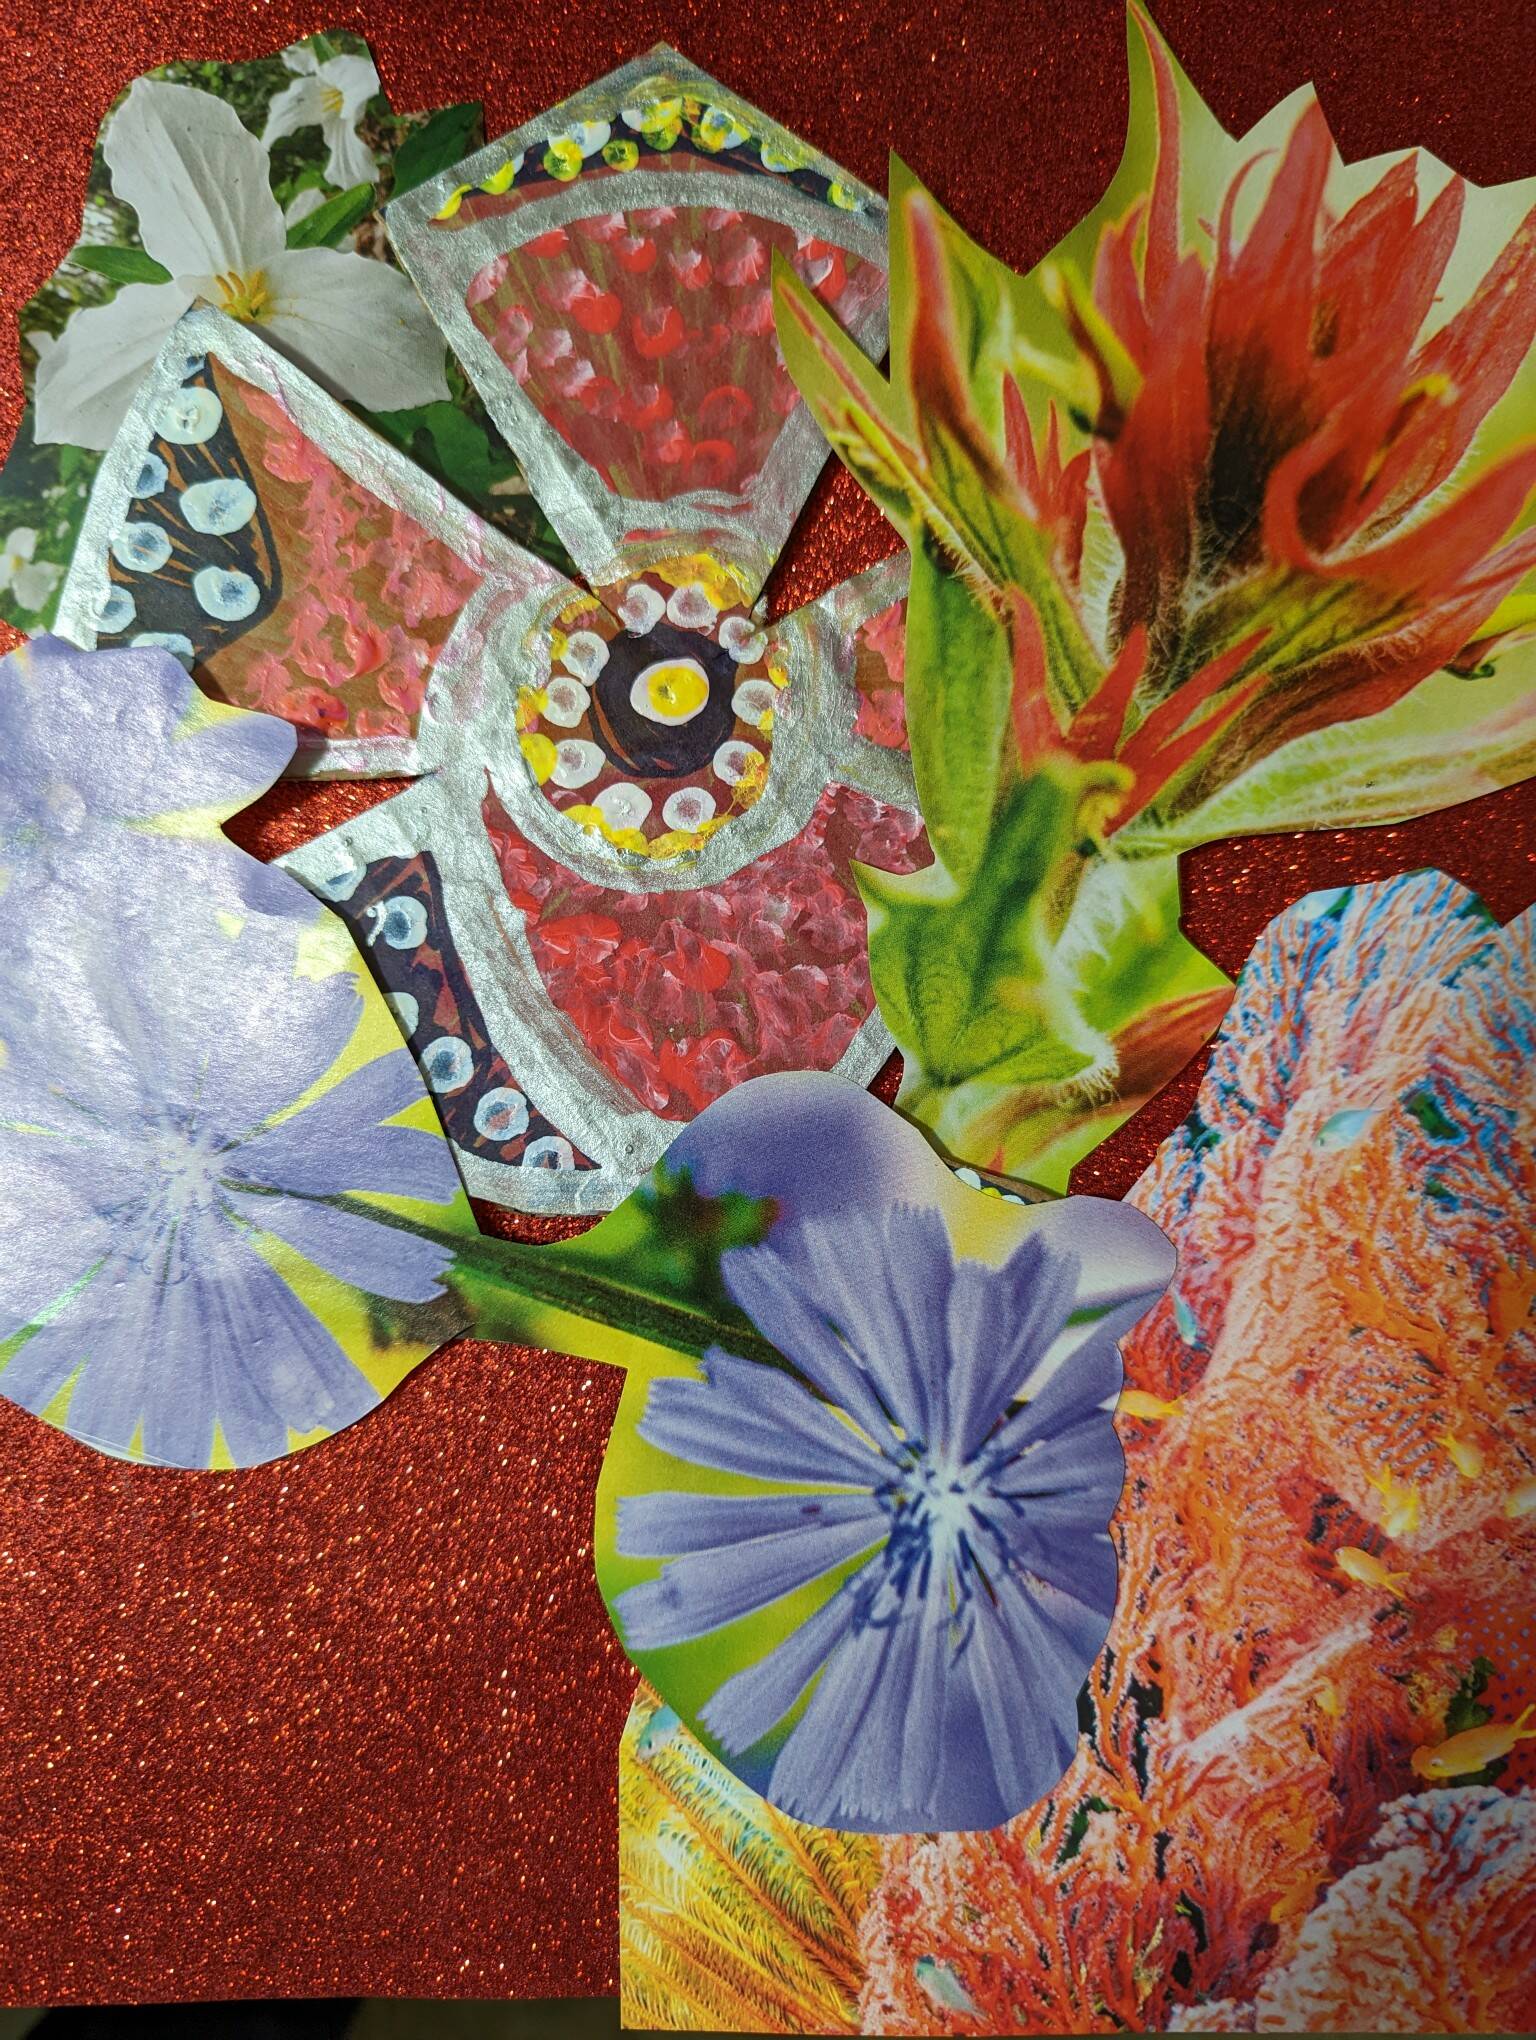 Photo contributed by SAn Juan Islands Museum of Art
“Burst of Color Collage” by Lana Hickman